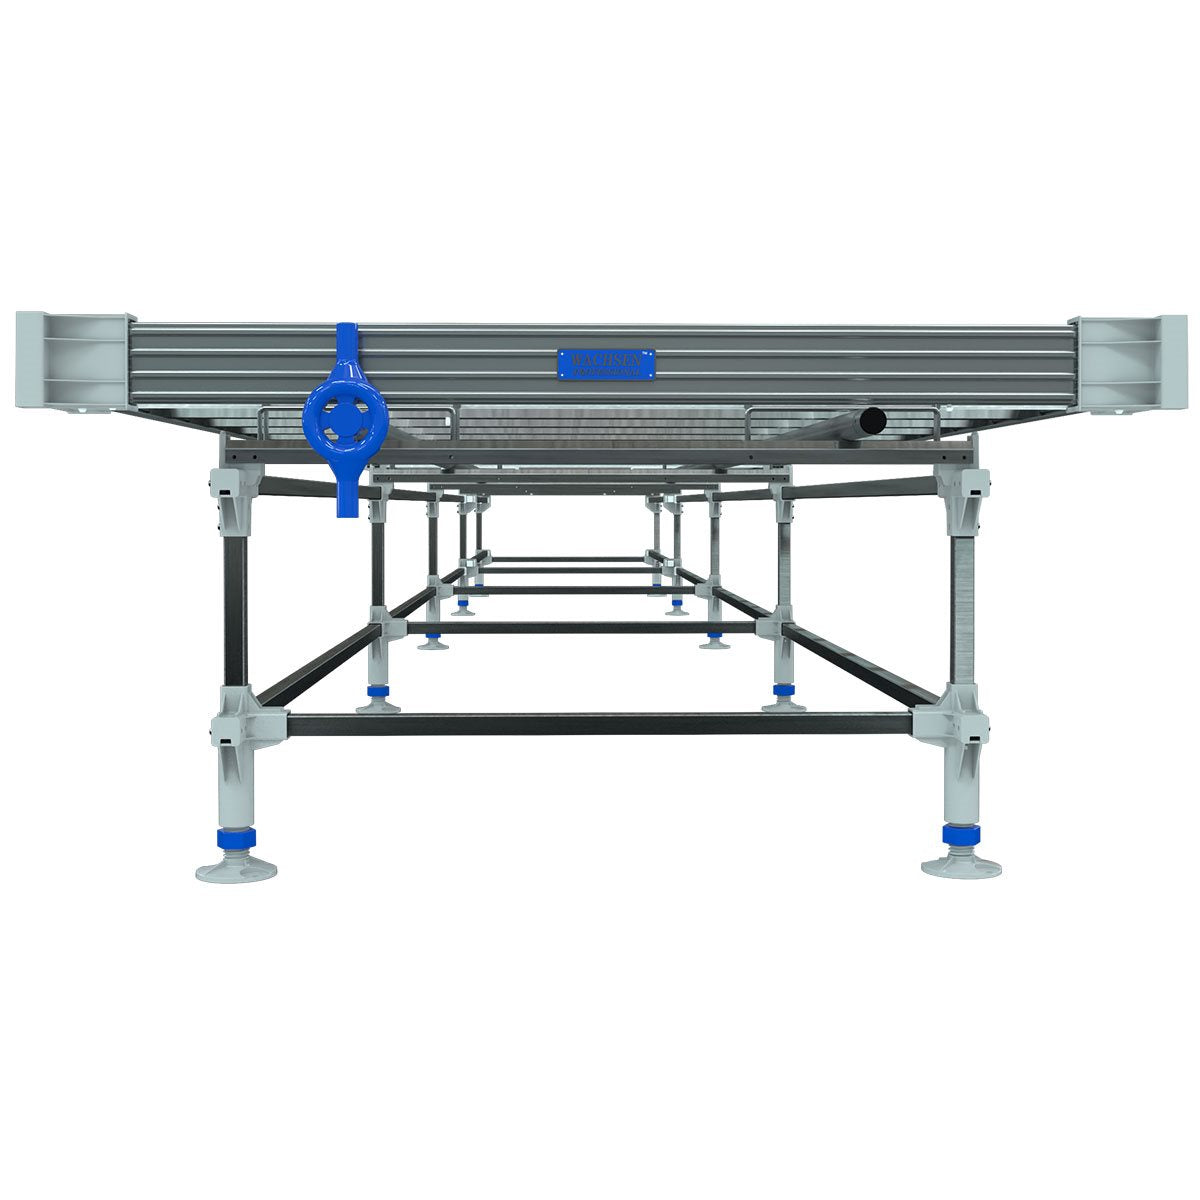 Product Secondary Image:Wachsen Rolling Bench Galvanized 4' Box B